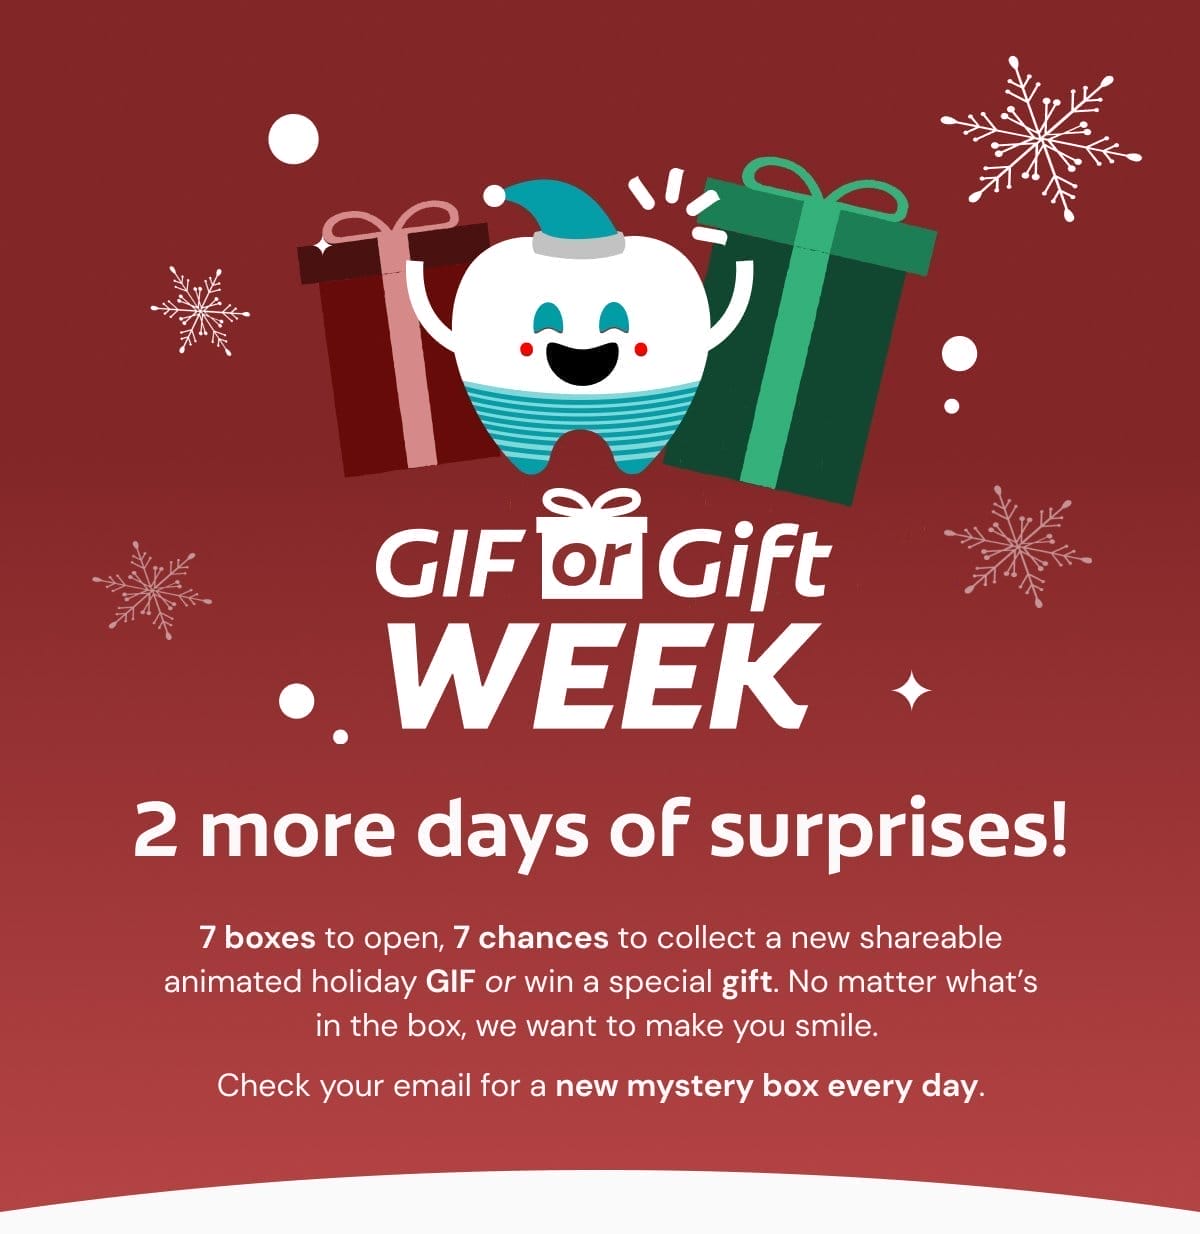 GIF or Gift Week 2 more days of surprises! 7 boxes to open, 7 chances to collect a new shareable animated holiday GIF or win a special gift. No matter what’s in the box, we want to make you smile. Check your email for a new mystery box every day.